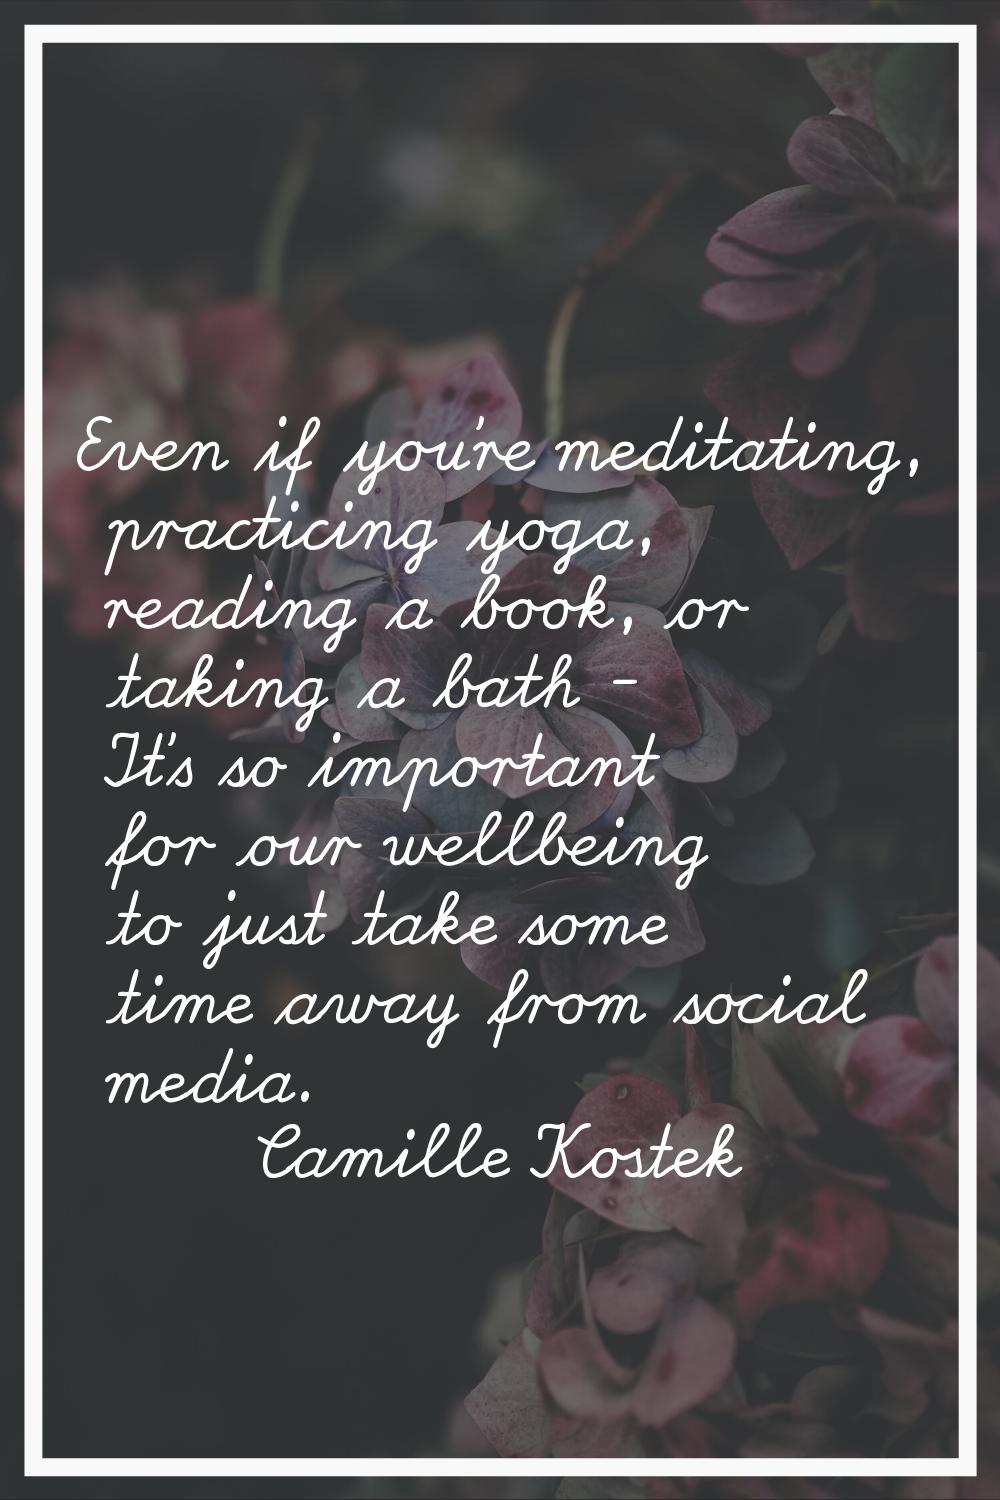 Even if you're meditating, practicing yoga, reading a book, or taking a bath - It's so important fo